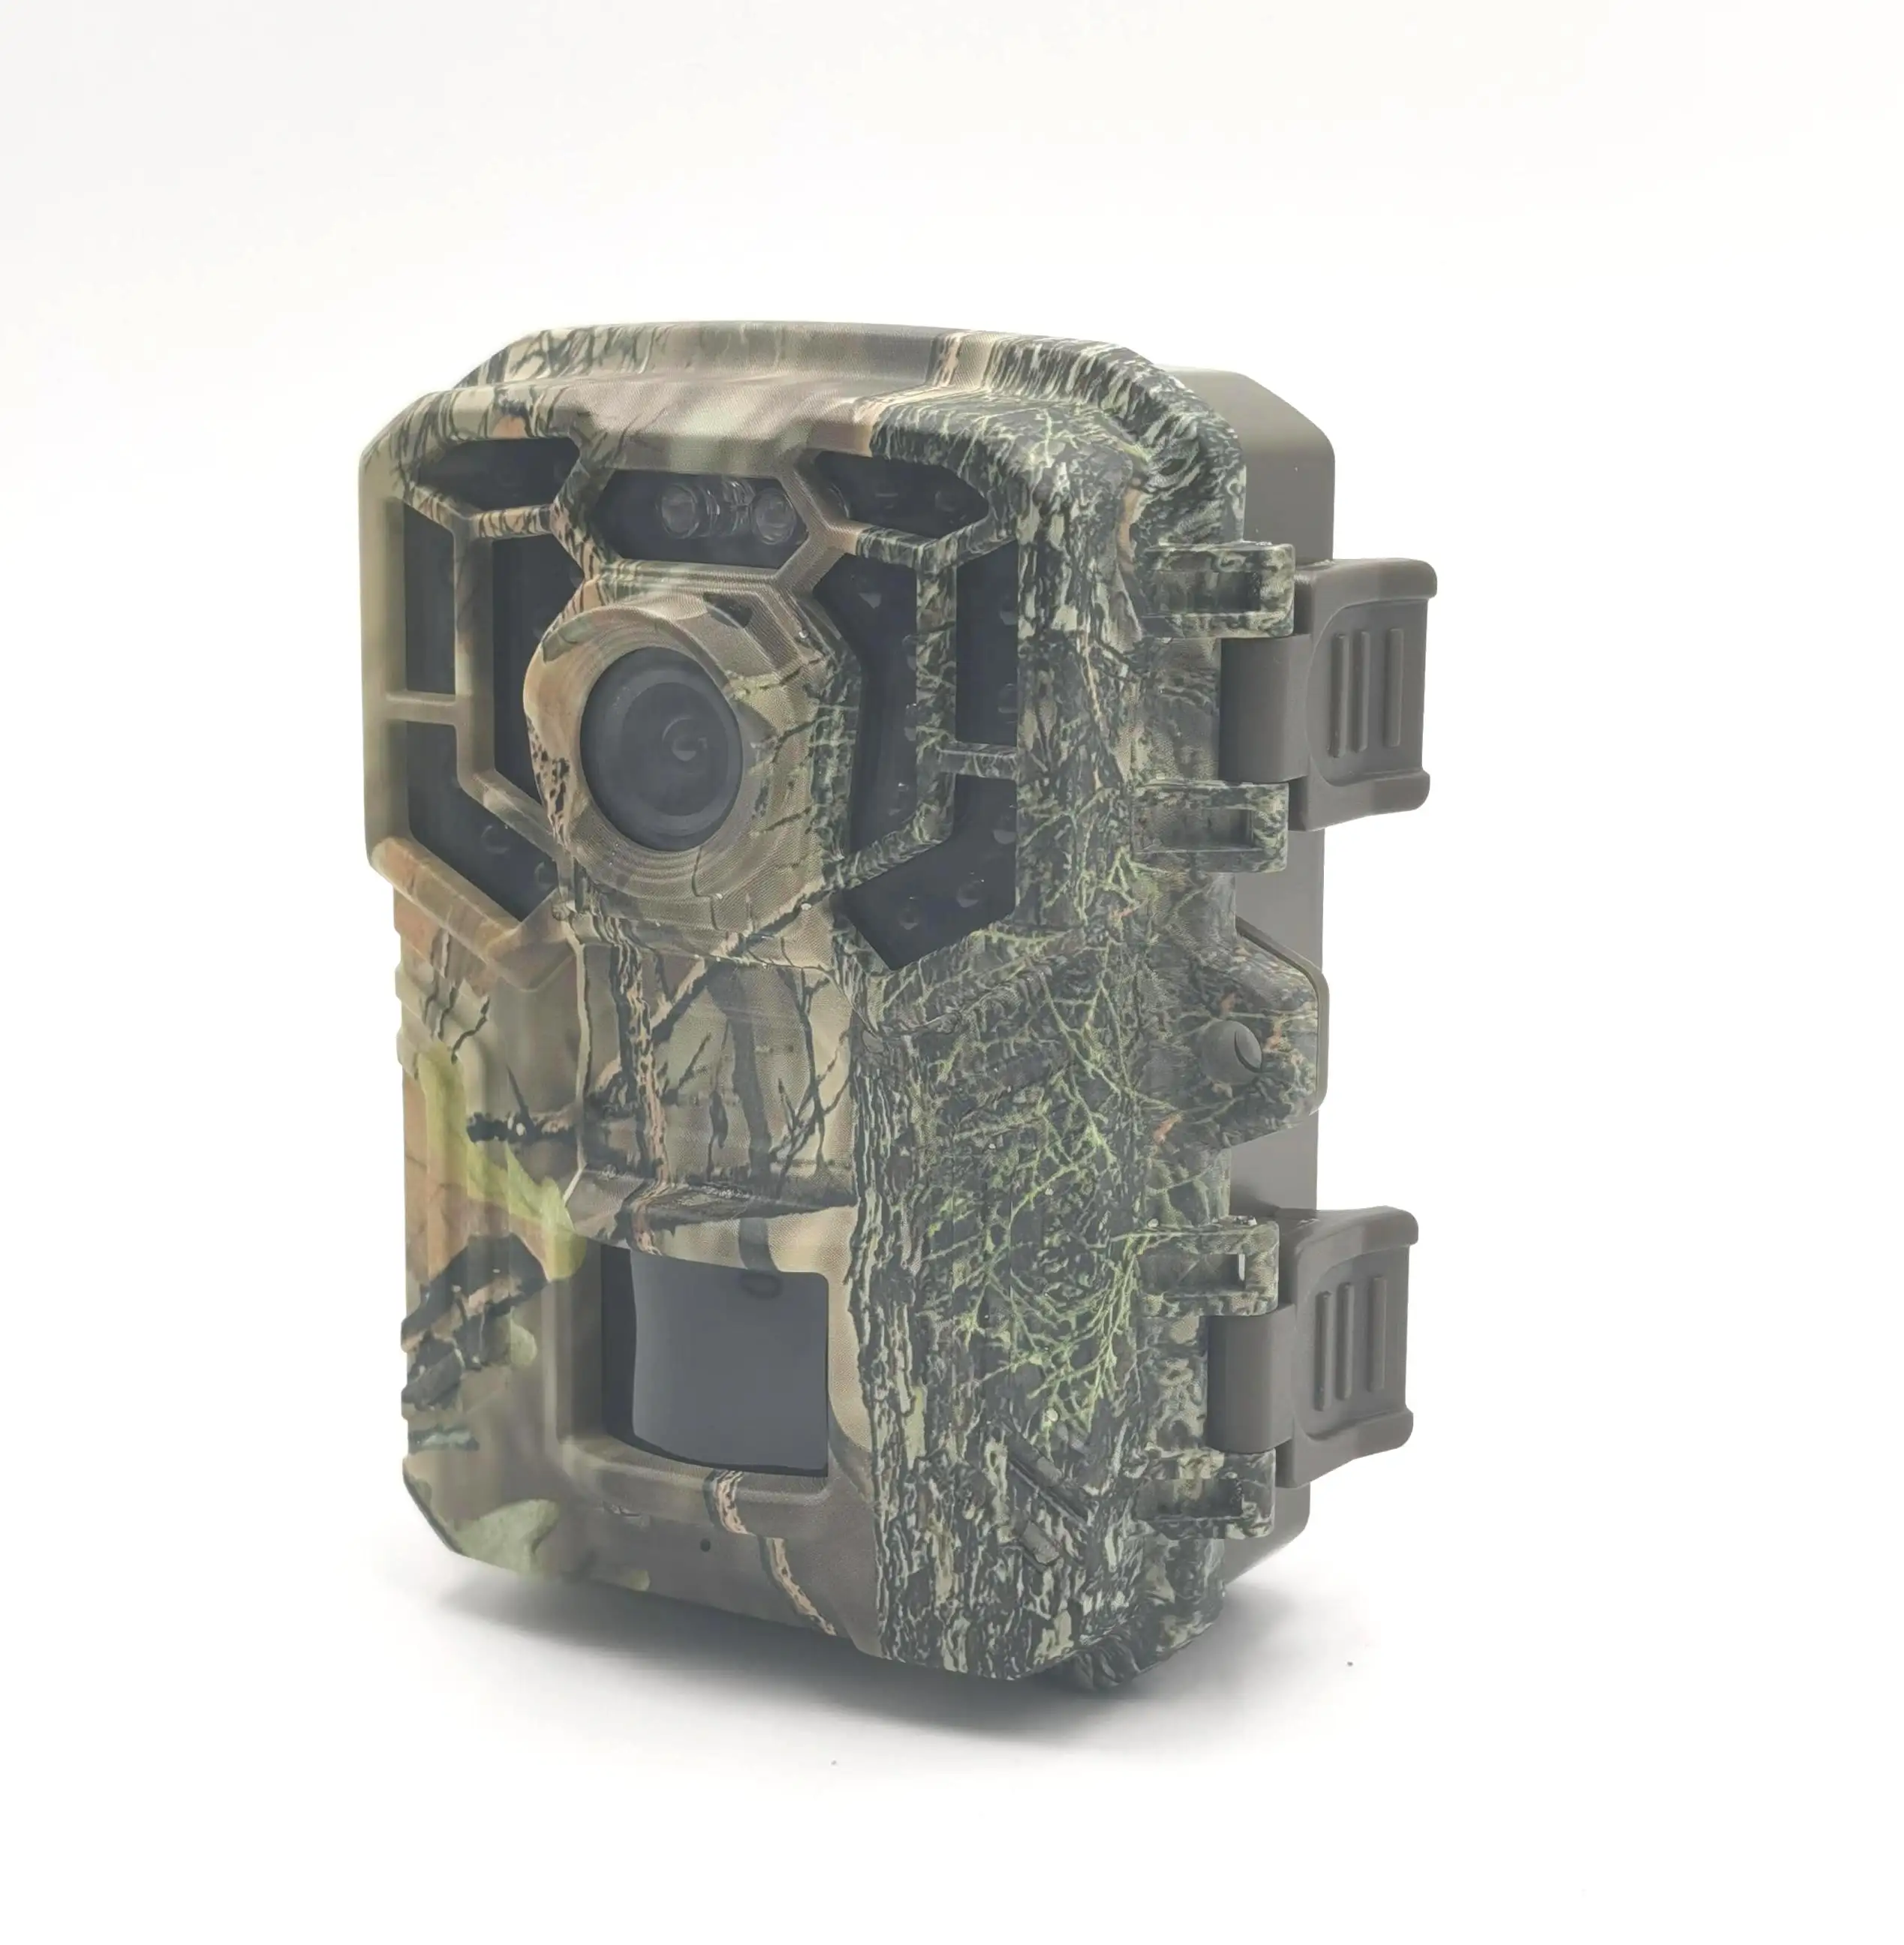 2022 Security High Tech Animal Hunting Camera Motion Activated Wildlife Cellular Video Recorder Digital Hunting Trail Camera